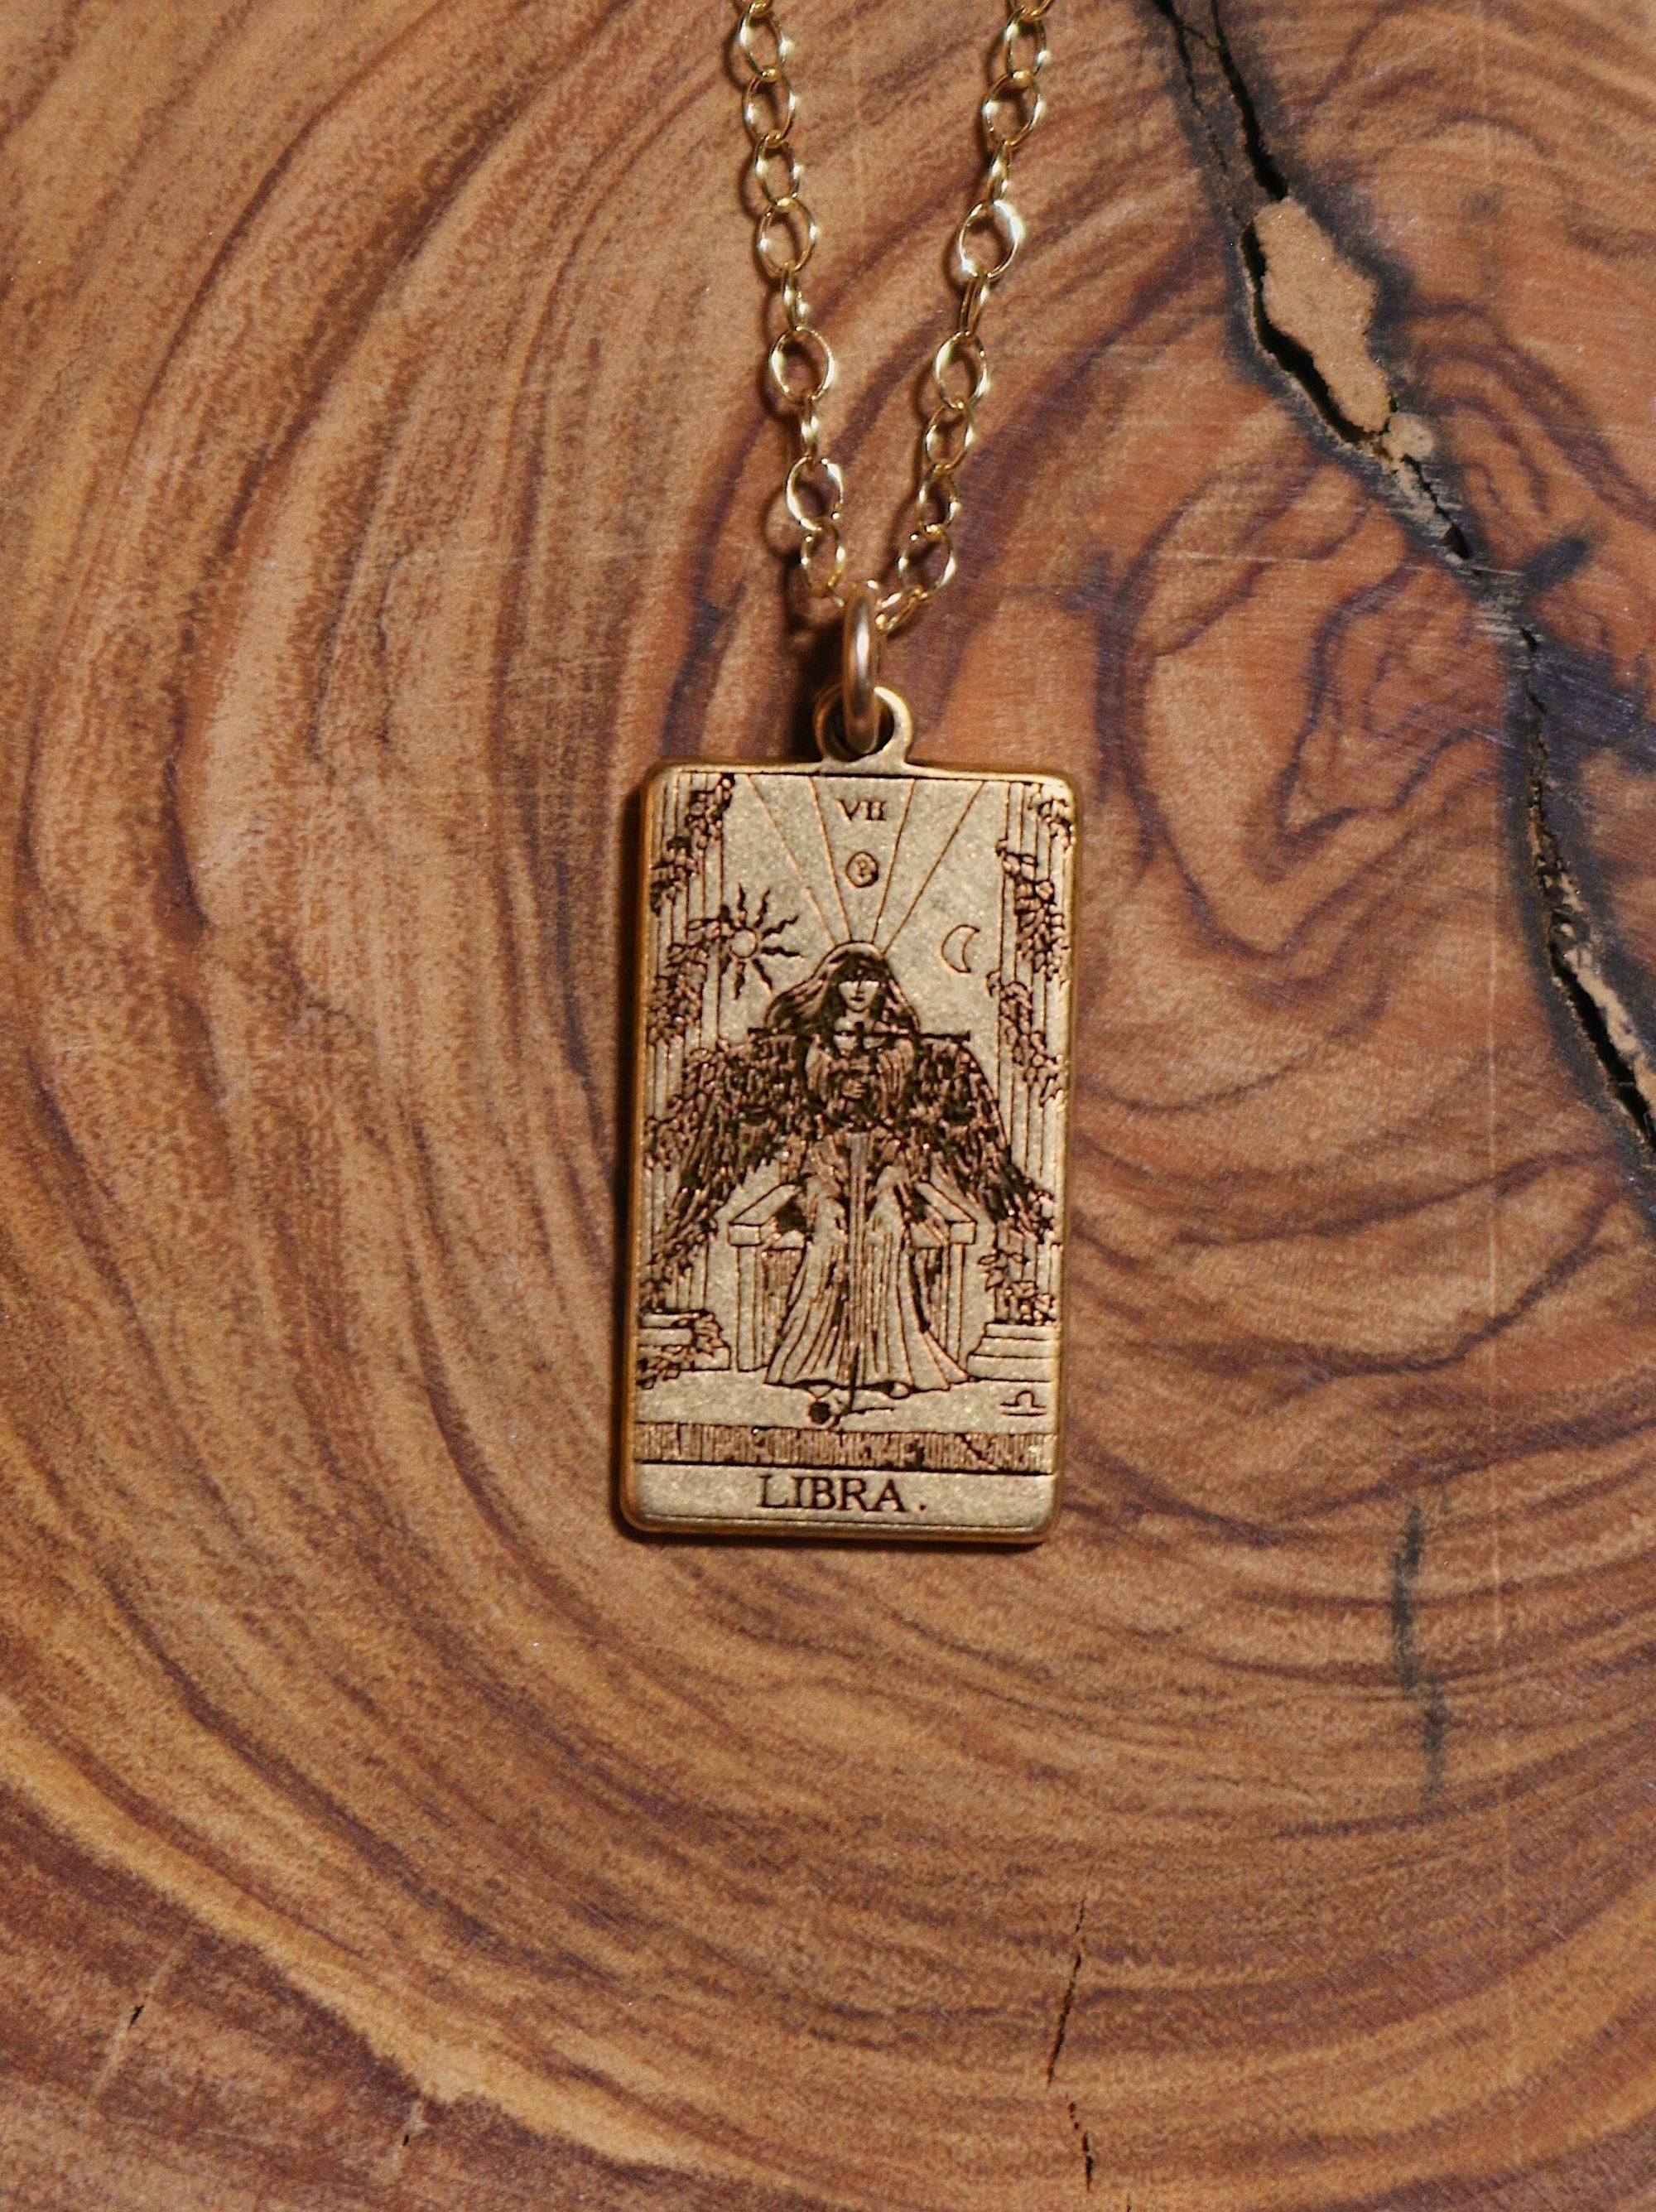 Libra Justice Tarot Card Inspired Zodiac Necklace - Gold Filled